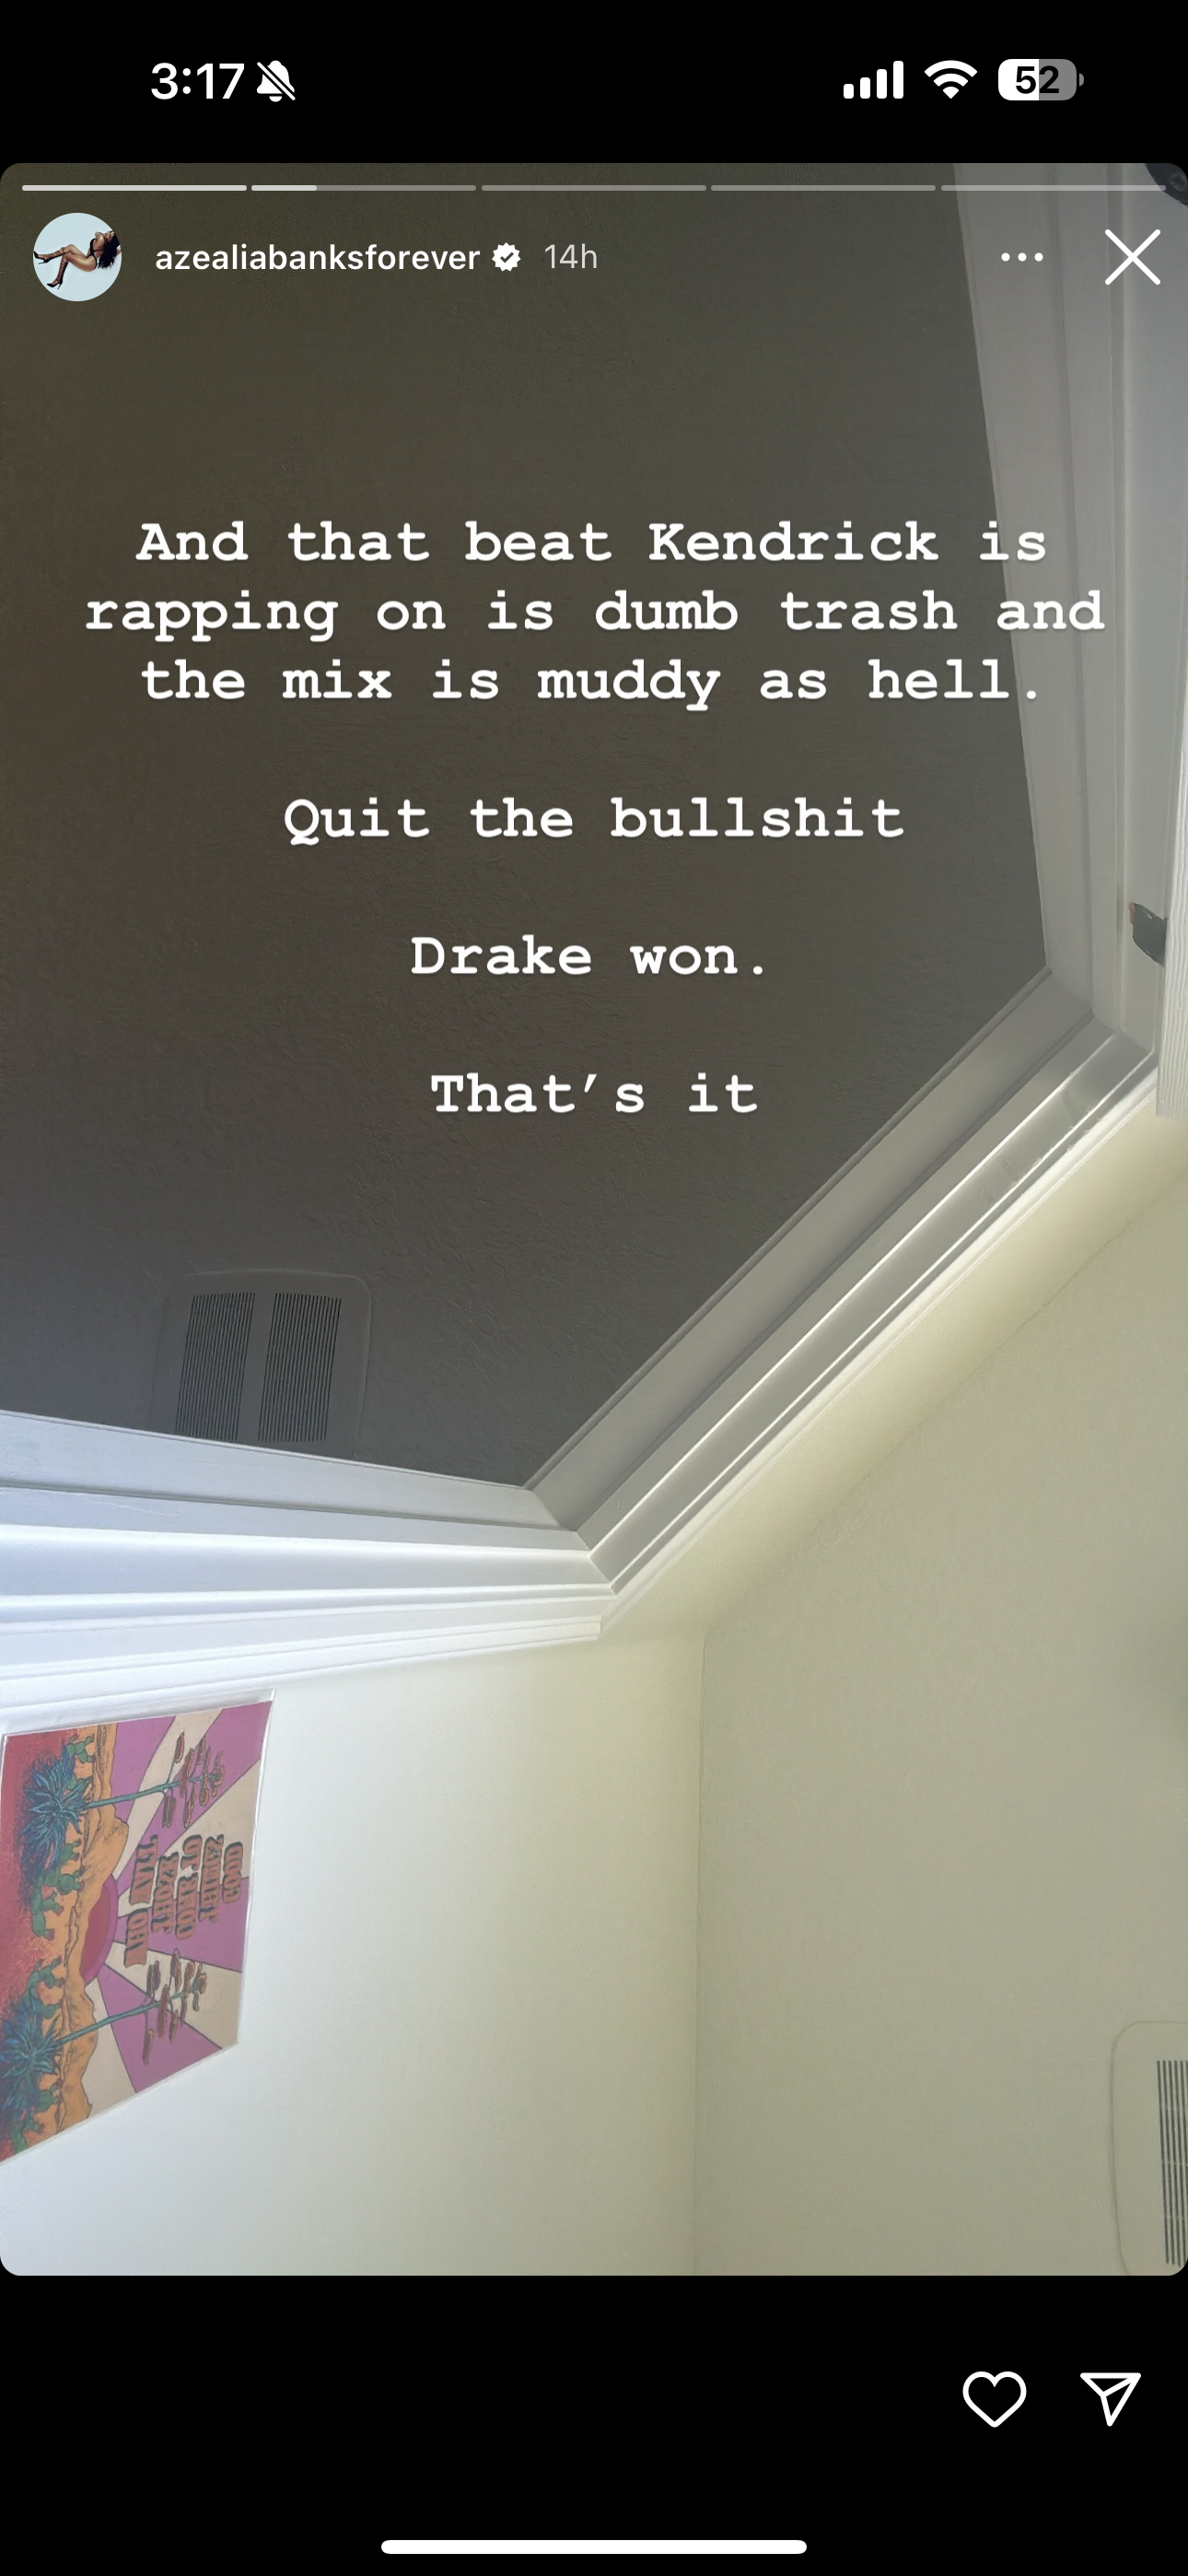 Text from an Instagram story criticizing someone&#x27;s music, implying it&#x27;s bad and stating &quot;Quit the bullshit. That&#x27;s it.&quot;